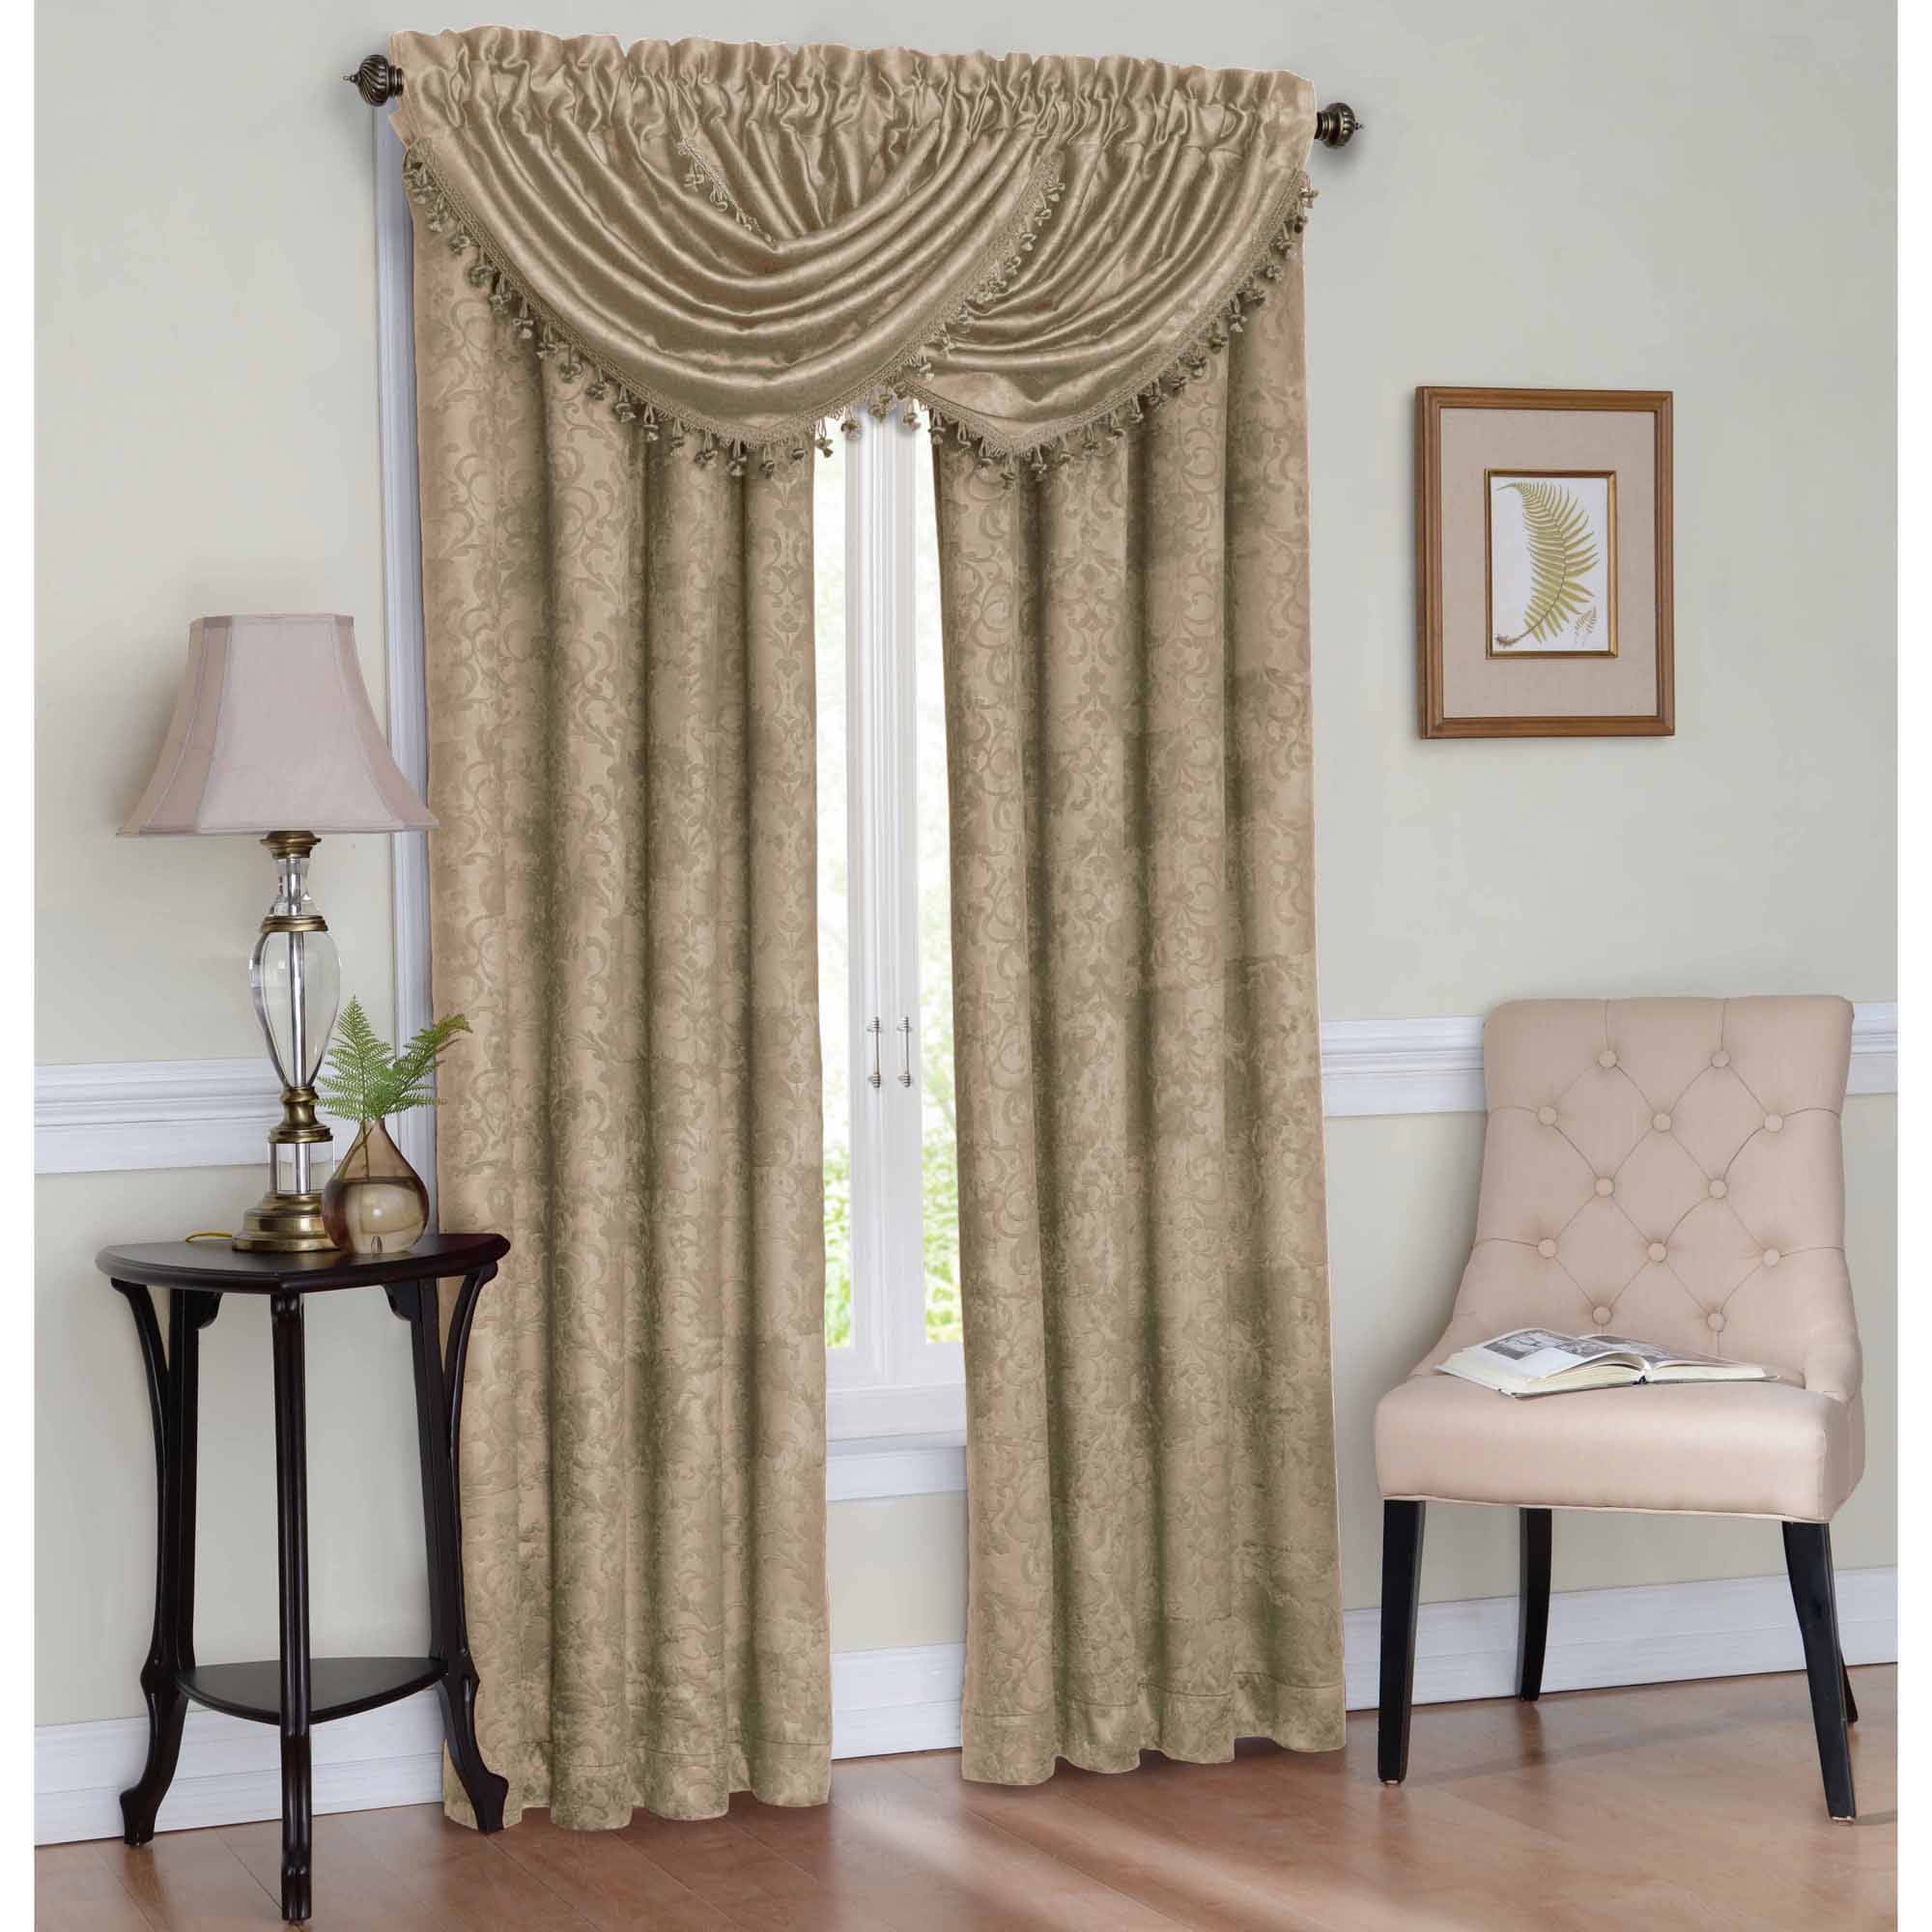 Waterfall Curtains For Living Room Walmart Furniture Bedroom / Amazon ...